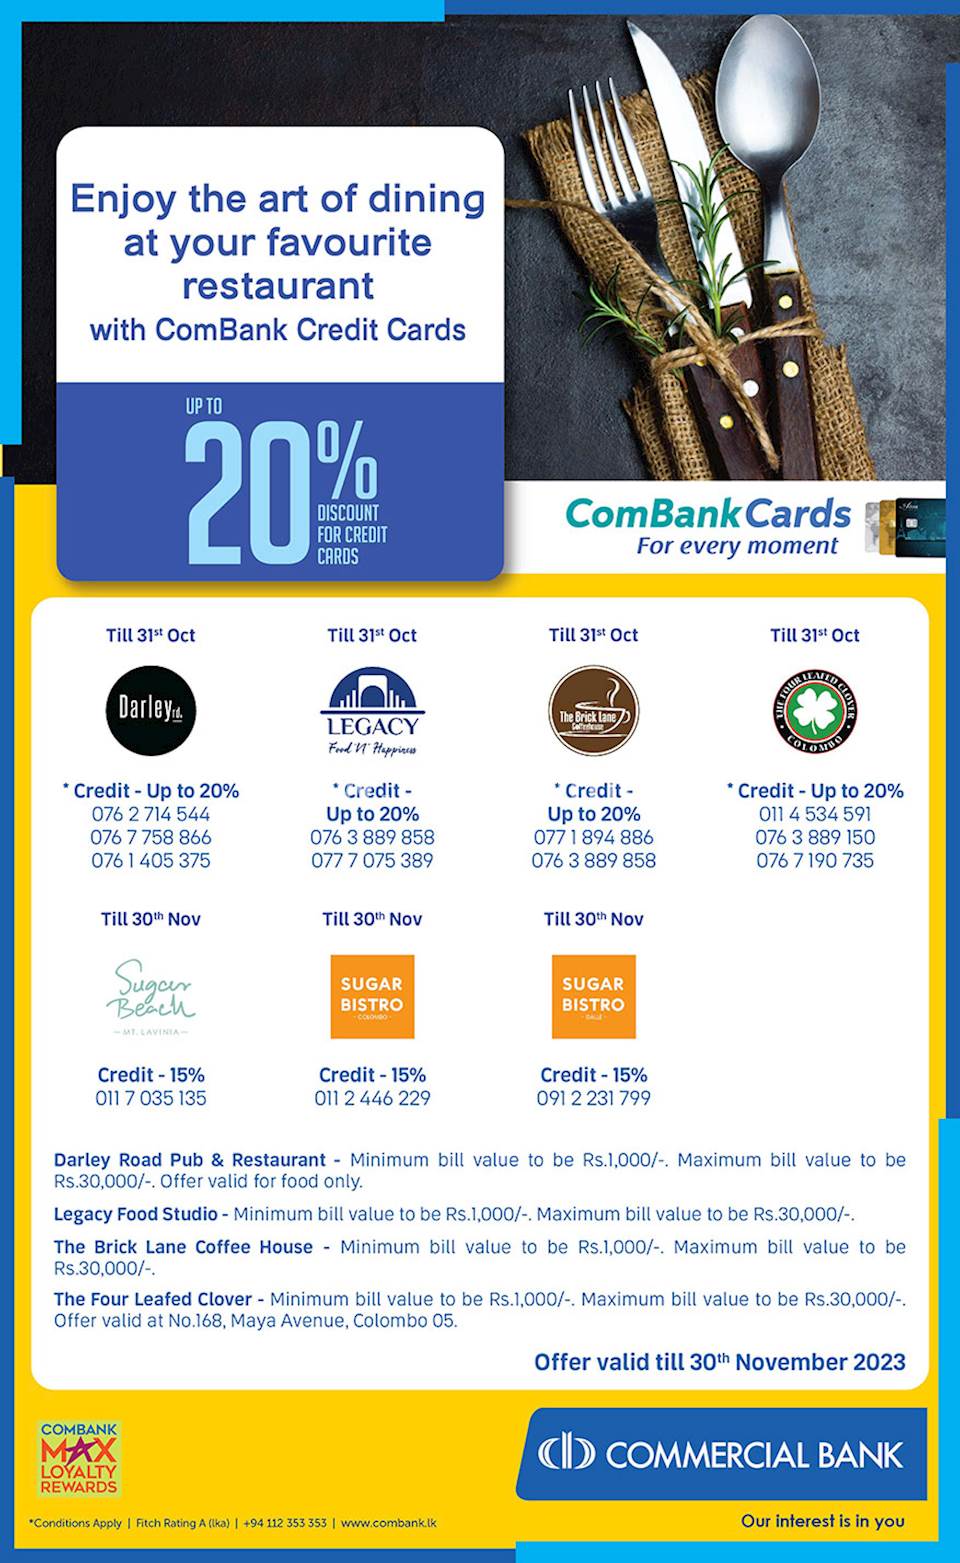 Enjoy the art of dining at your favourite restaurant with ComBank Credit Cards